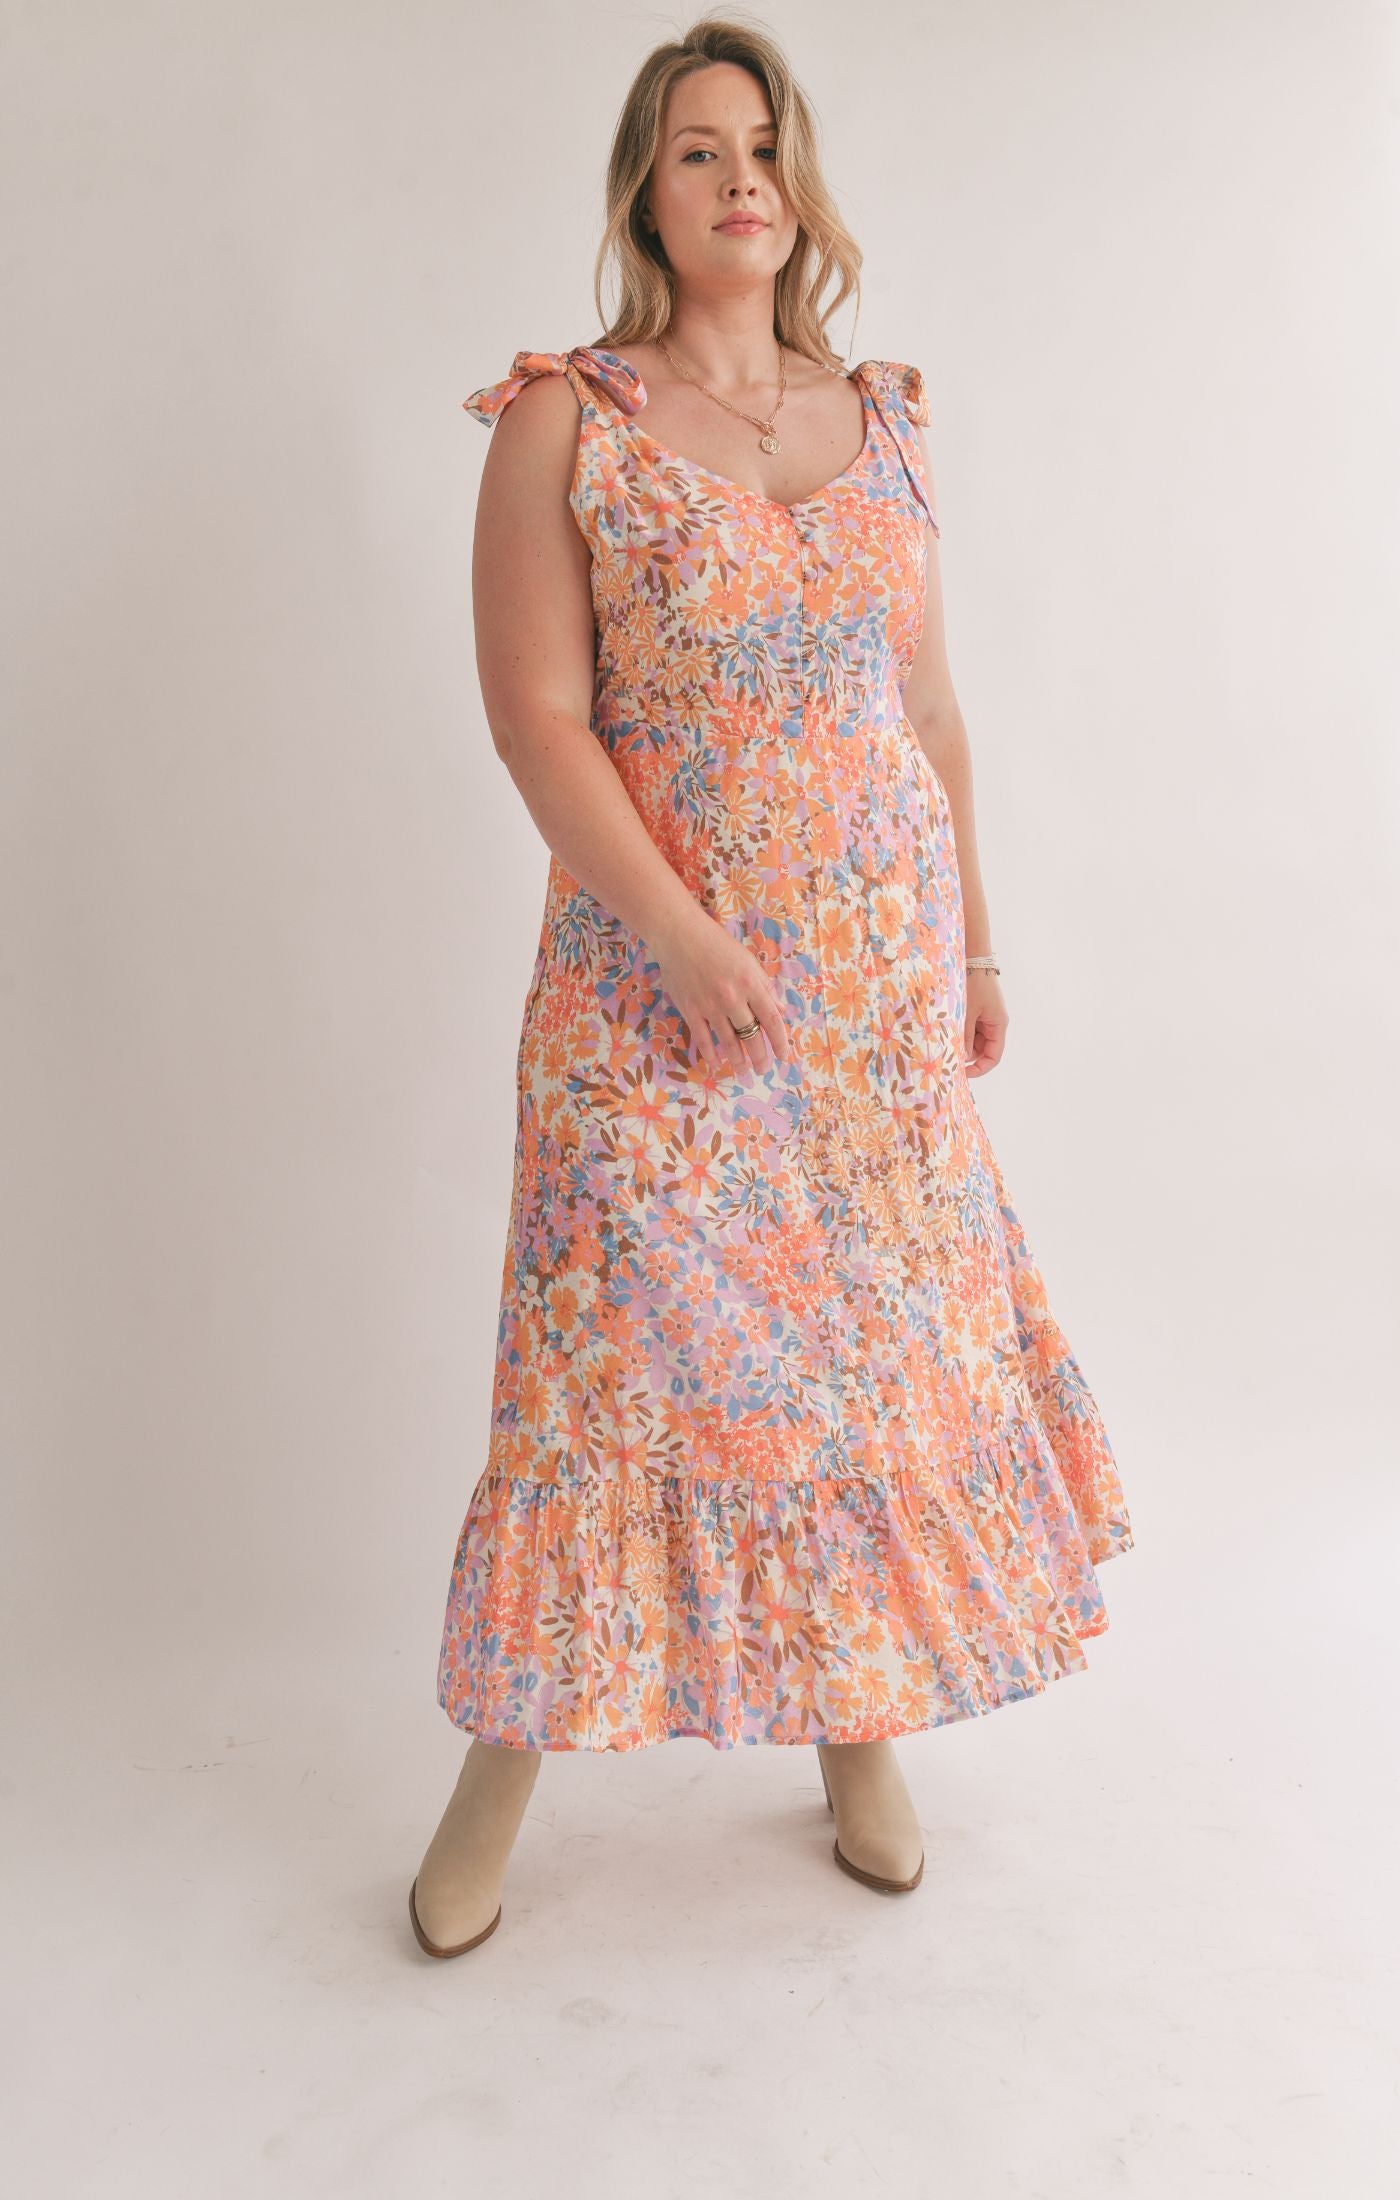 PLUS Moonscapes Tiered Midi Dress with Tie Straps - Multi Color